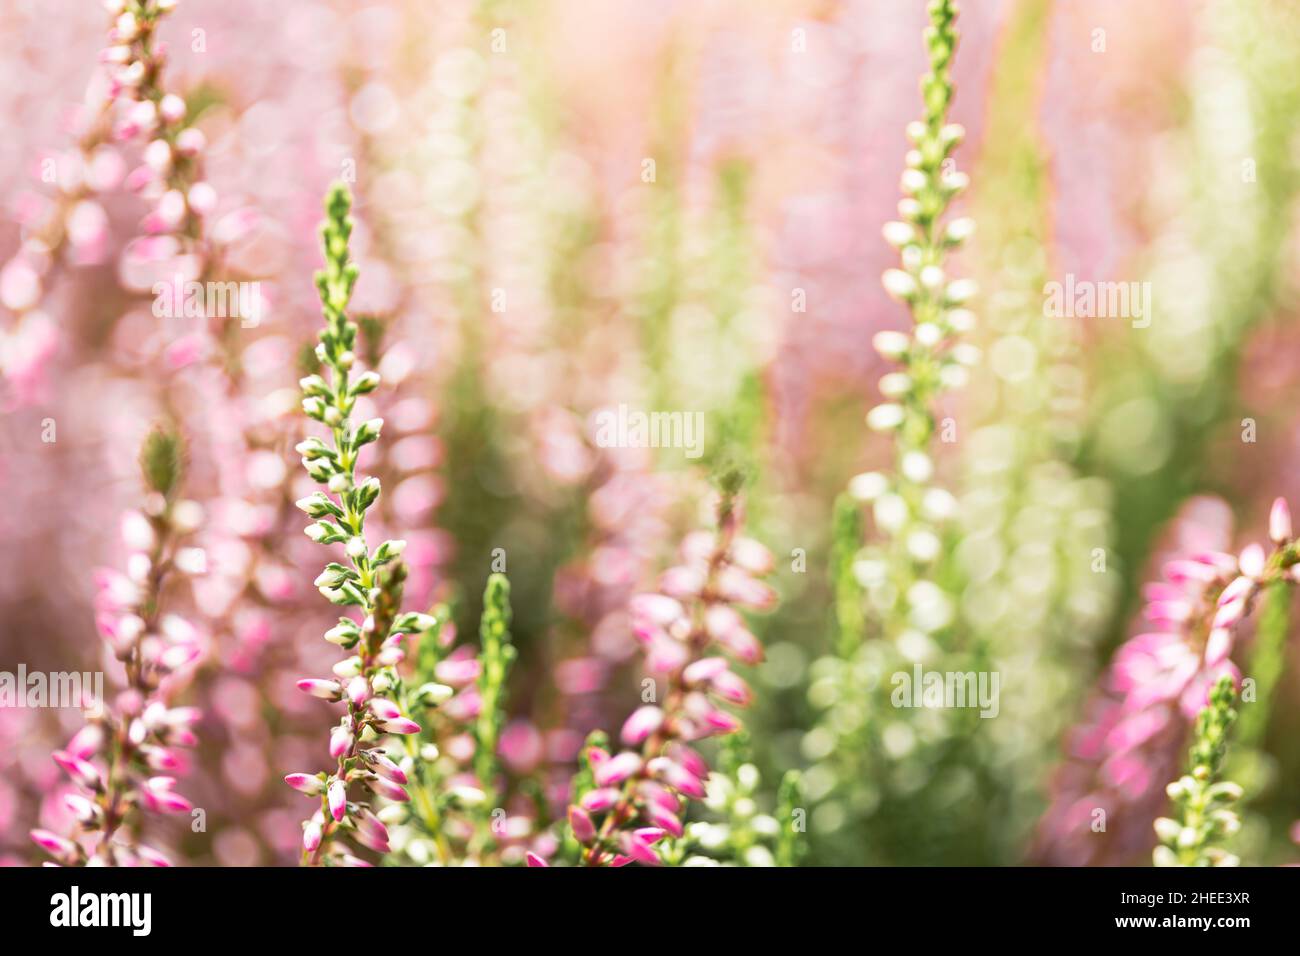 Colorful background of winter decorative heather flowers Stock Photo